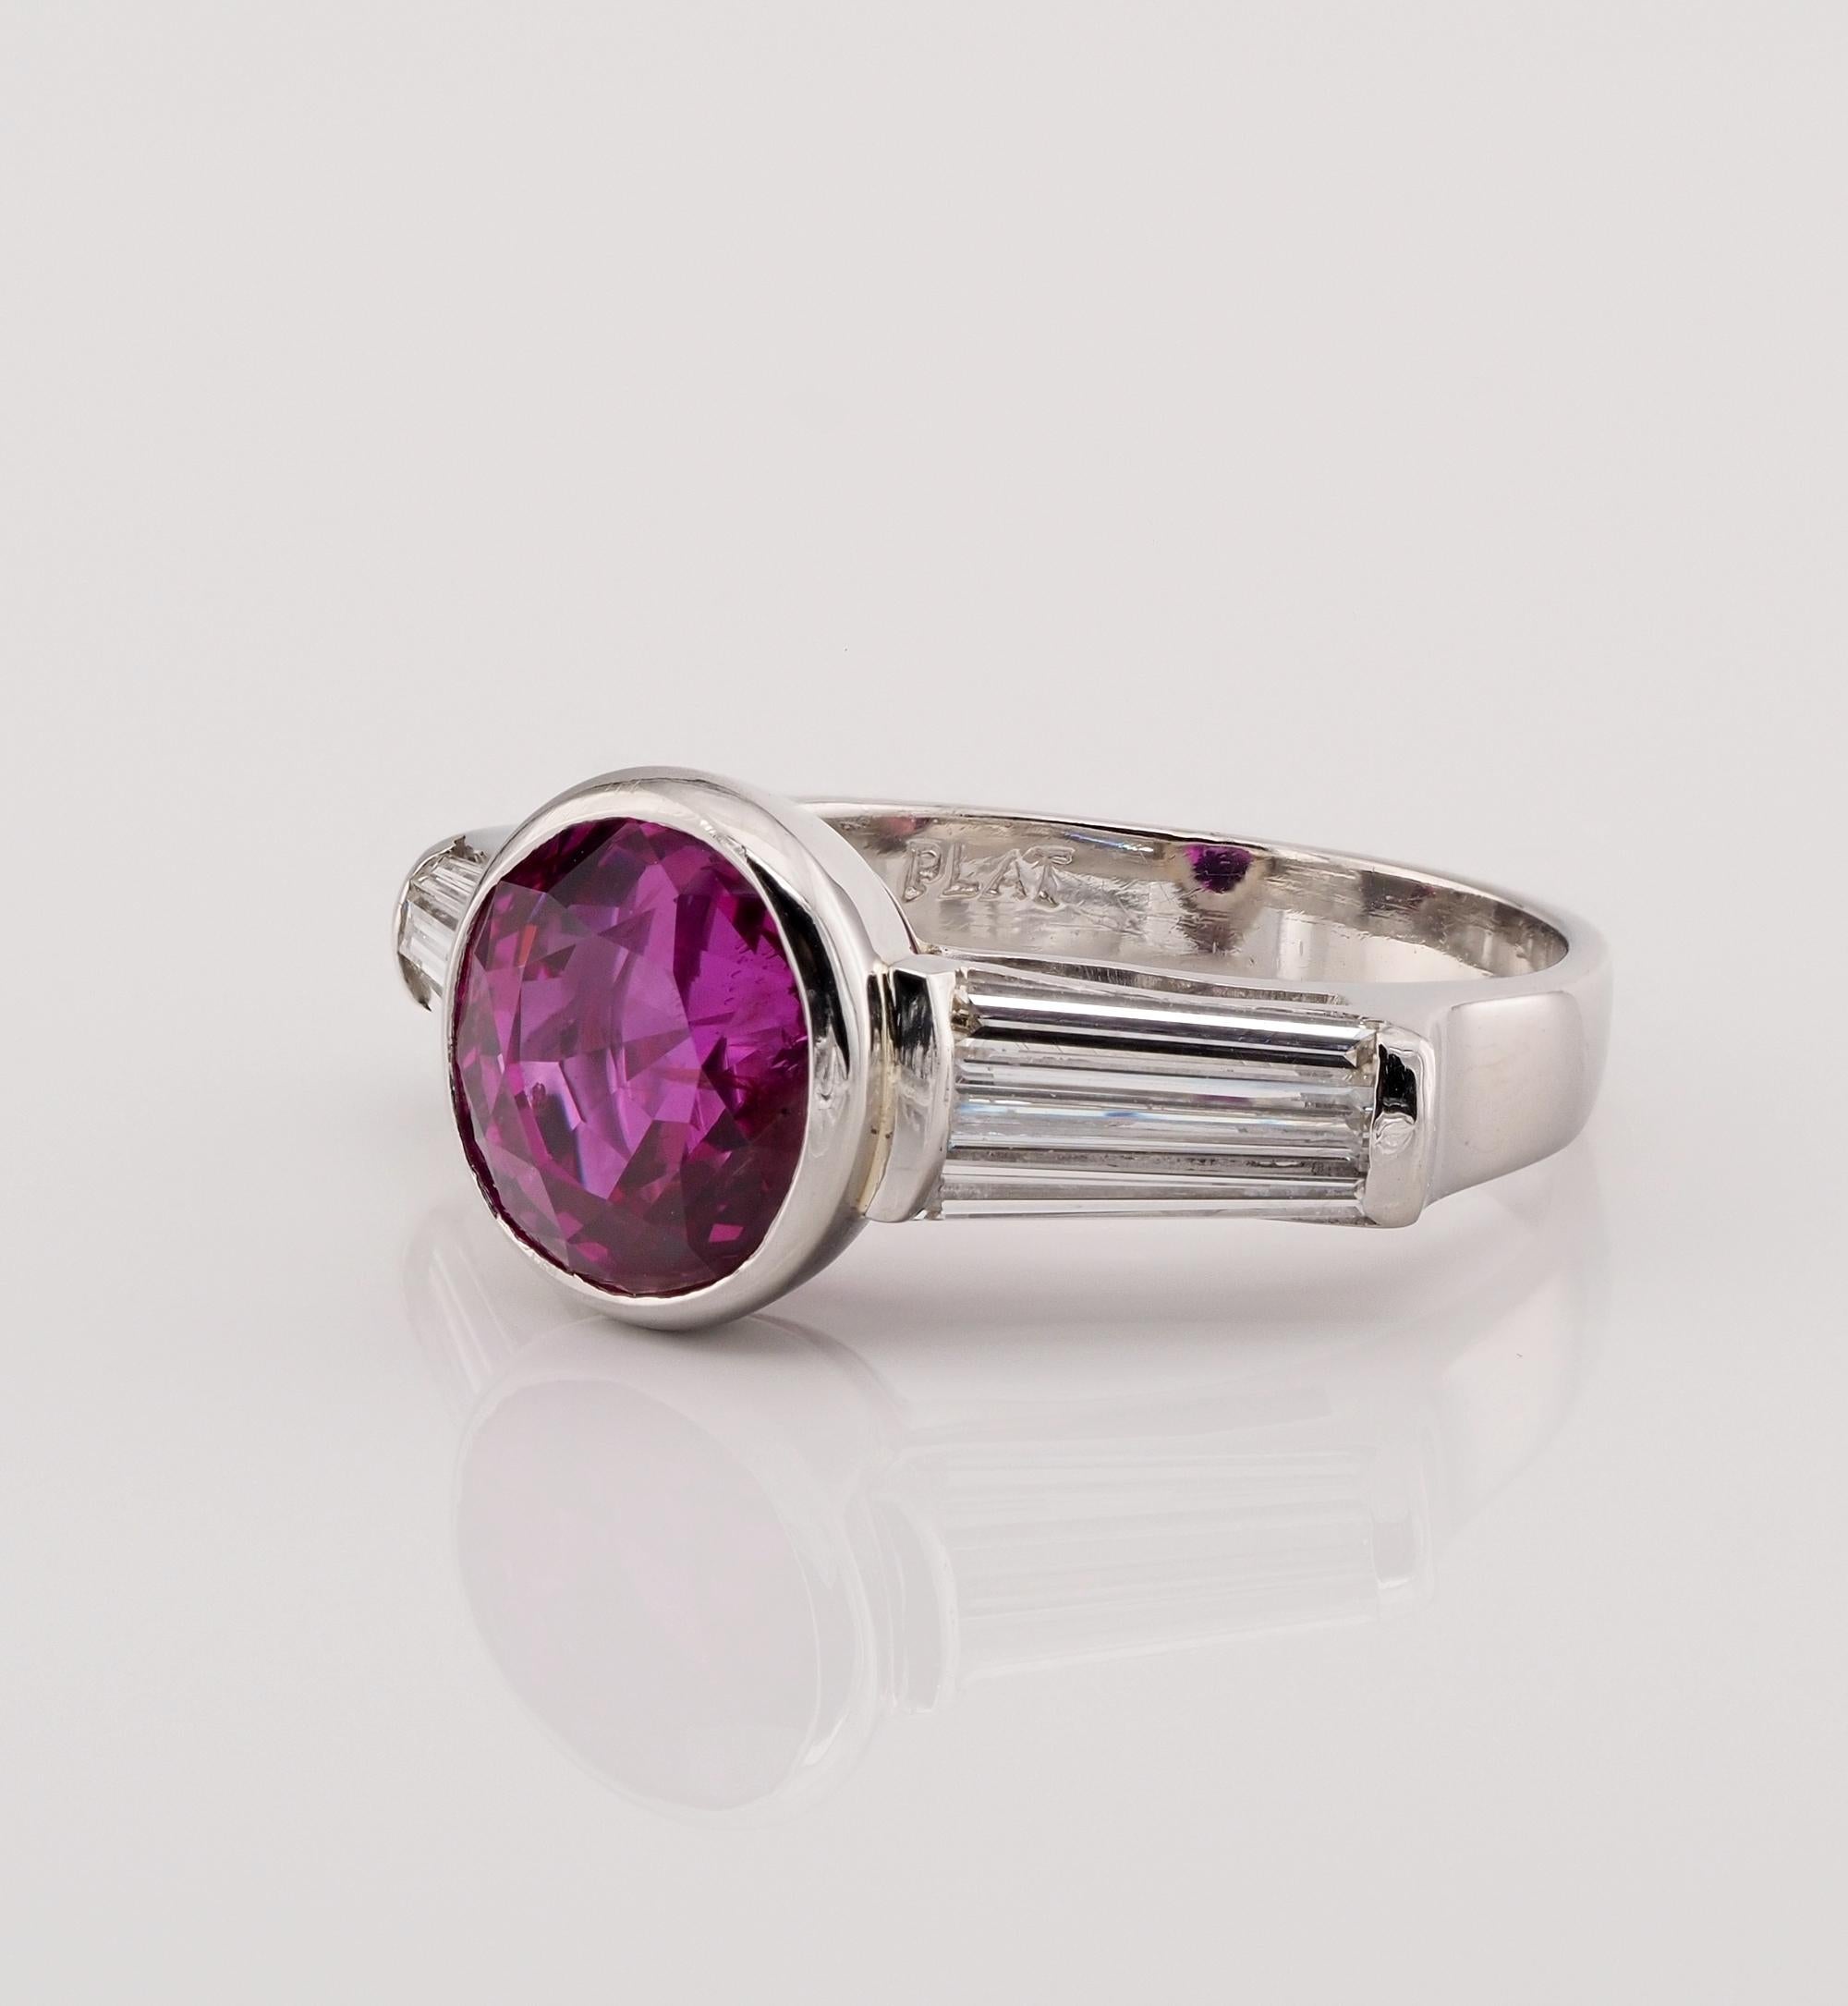 Certified 5.22 Ct Burma No heat Pink Sapphire Diamond Platinum Ring In Excellent Condition For Sale In Napoli, IT